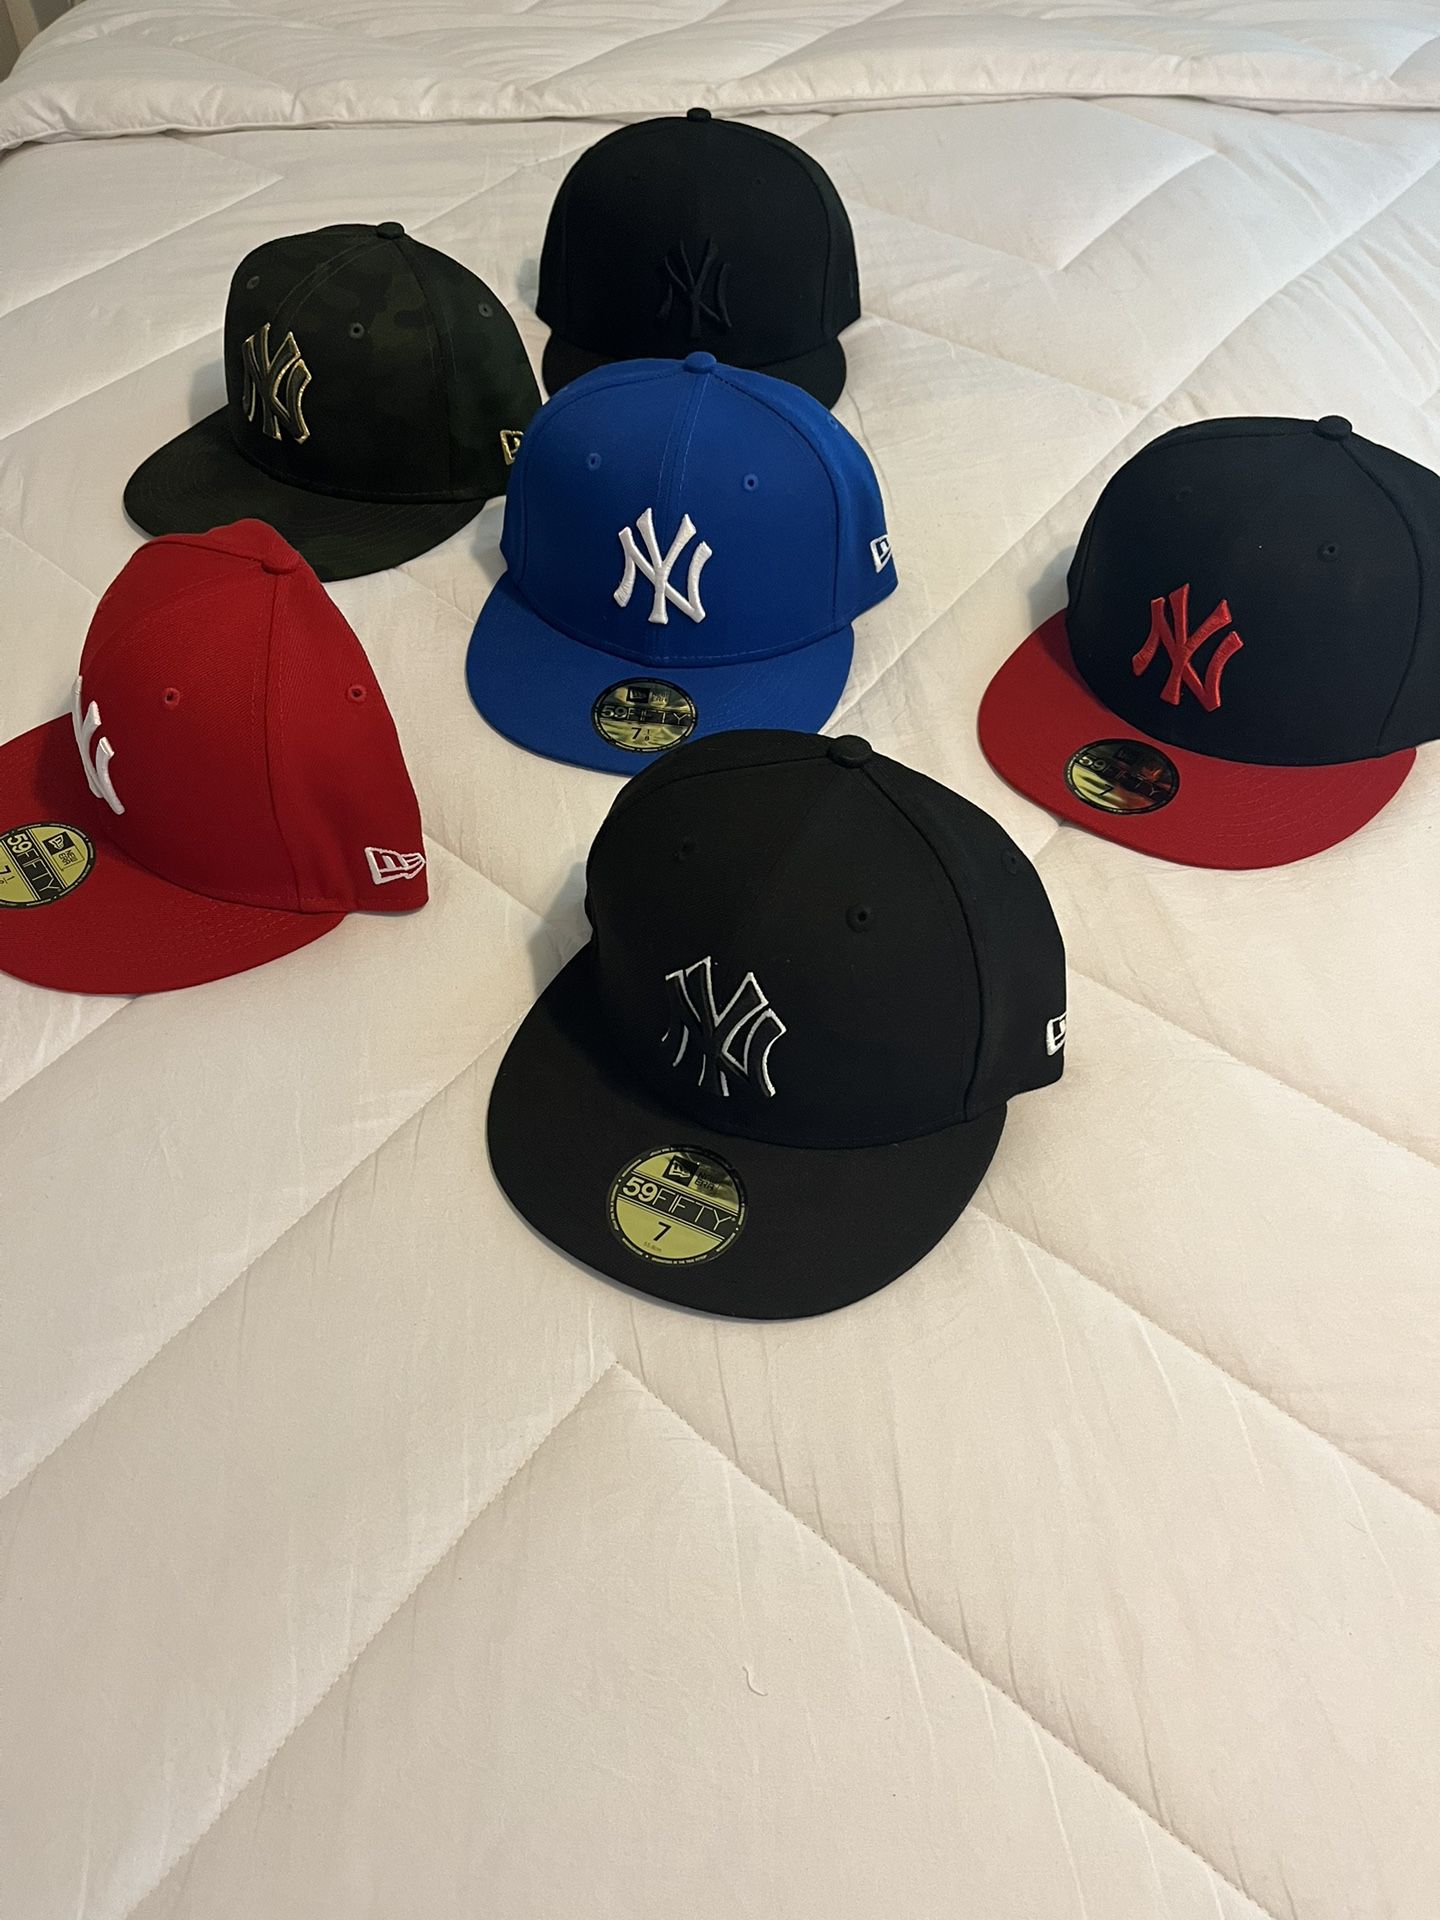 Brand New Hats Size 7 $20 Dollars Each 